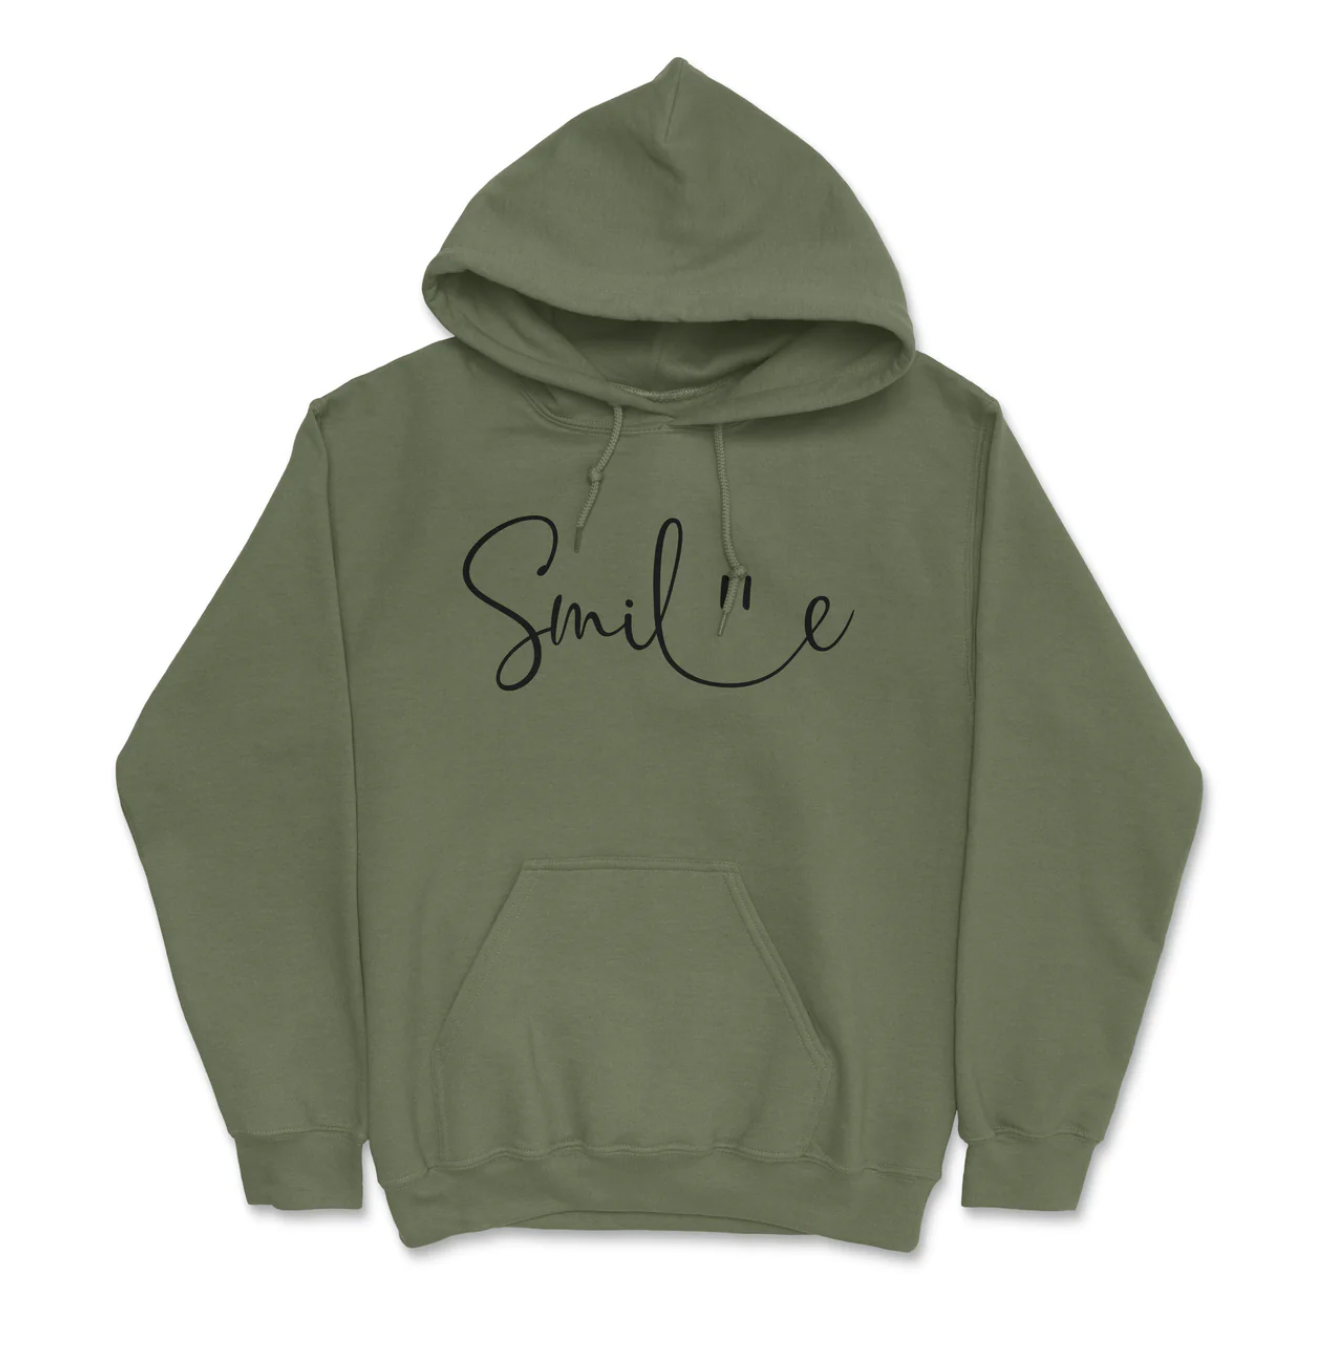 Smiles for Shauna Hoodie